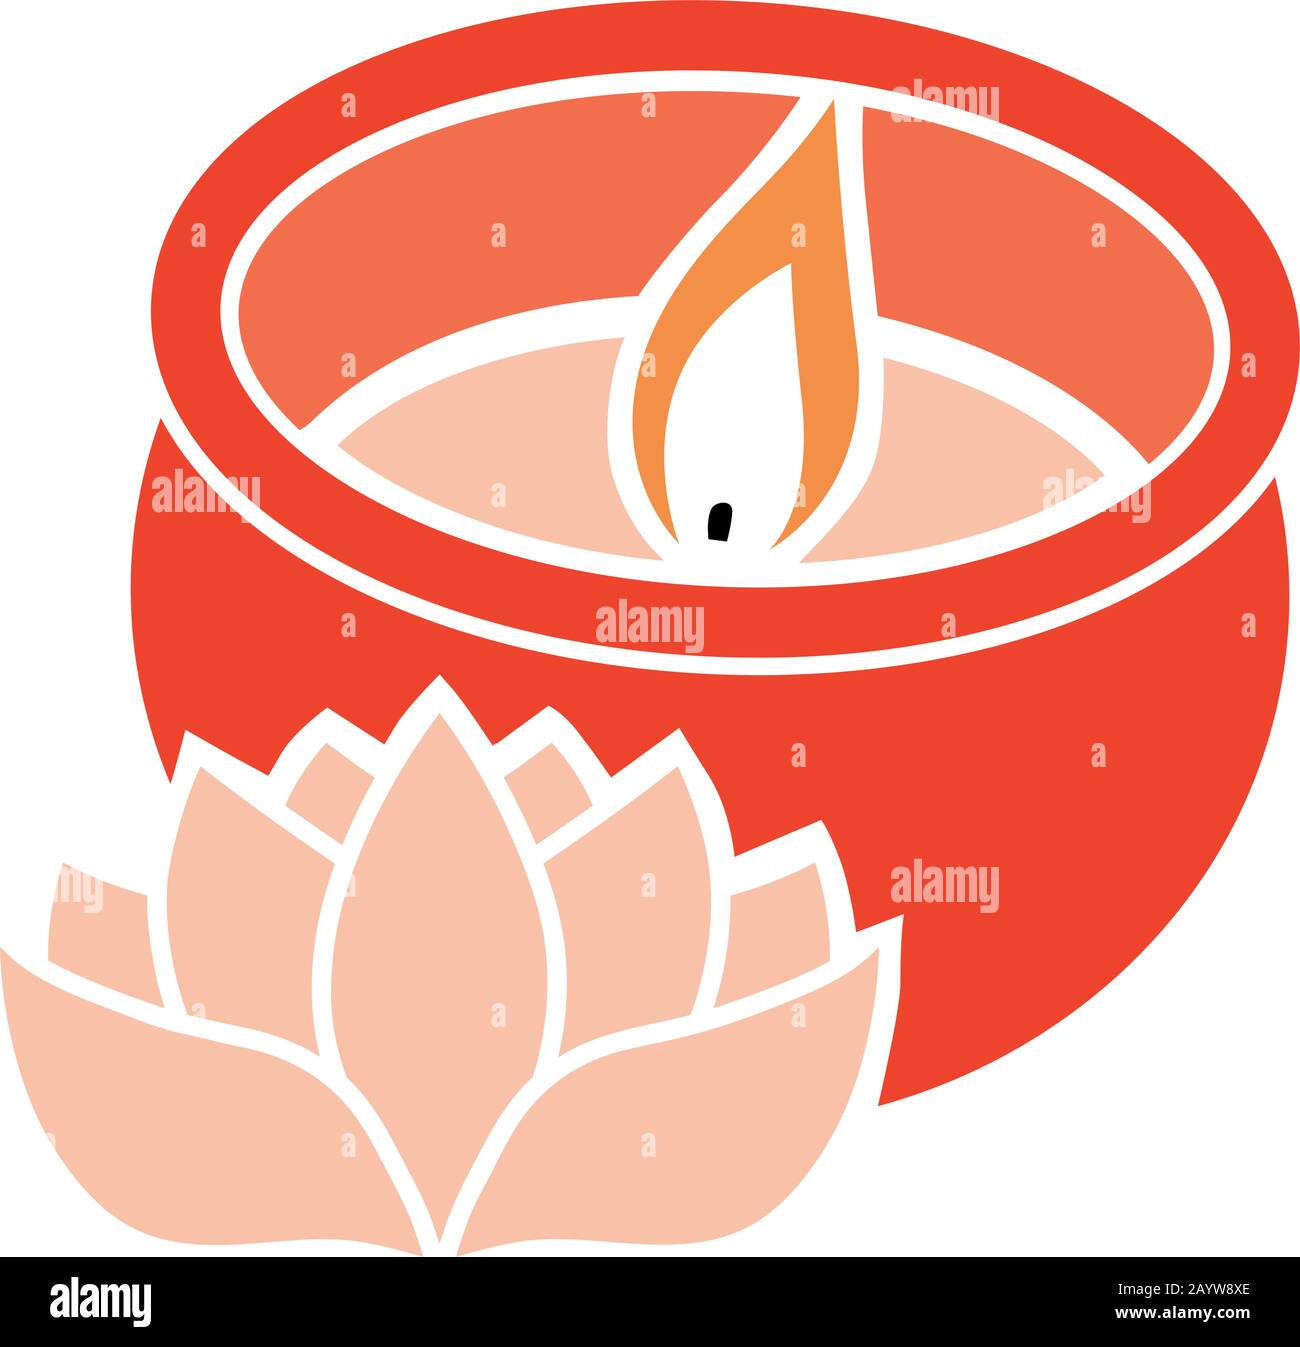 candle and lotus, vector graphic design element Stock Vector